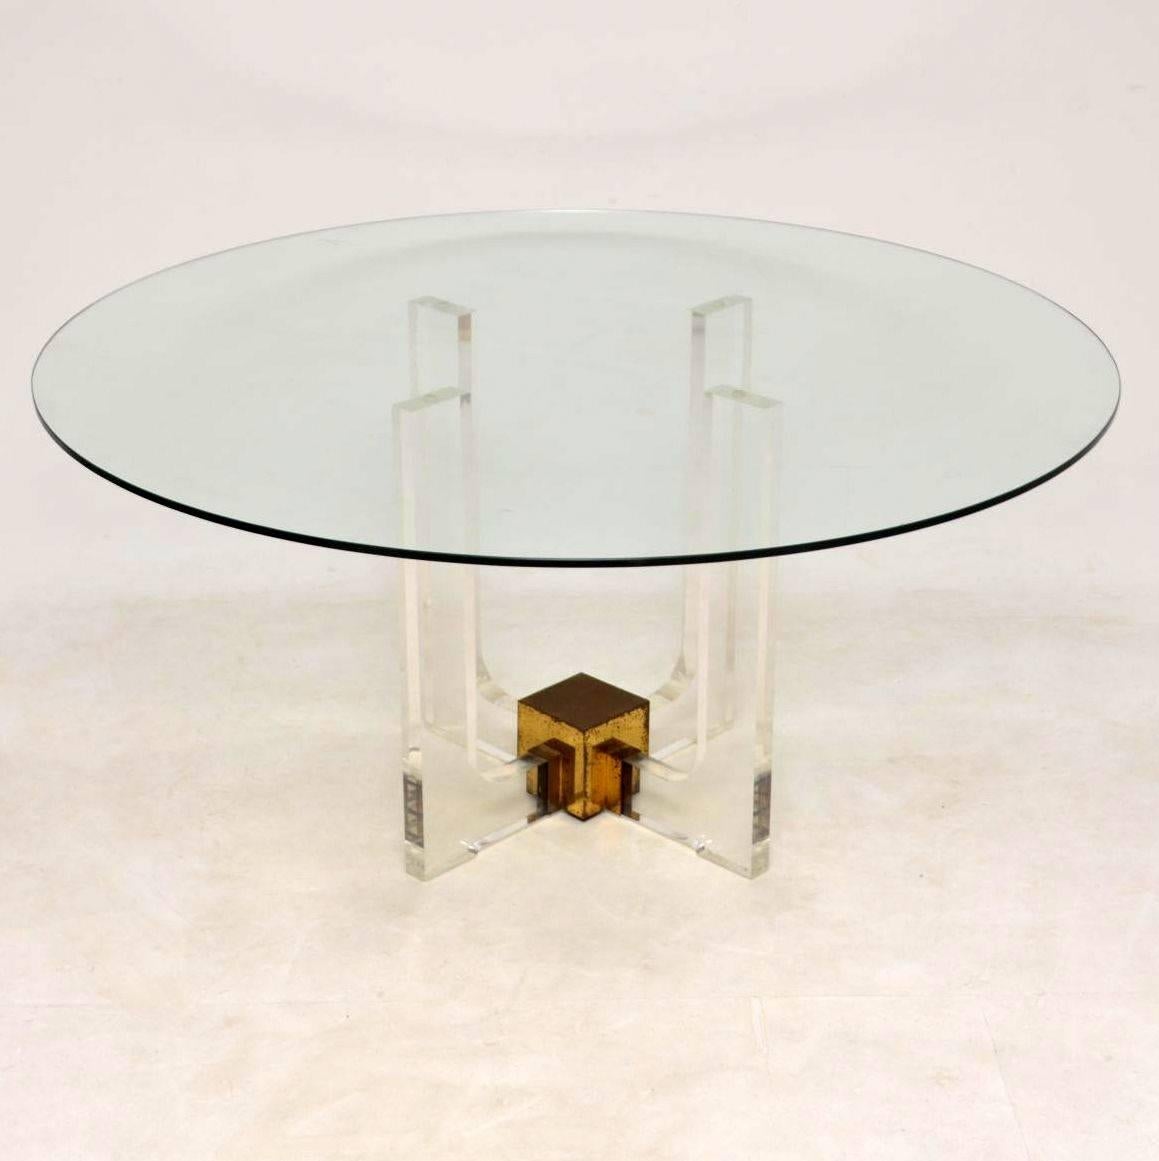 A stunning vintage dining table with a huge circular glass top and thick clear Lucite base this dates from the 1970s. The base has a brass block connecting the four supports, the brass has some surface wear and tarnishing seen in the images, the